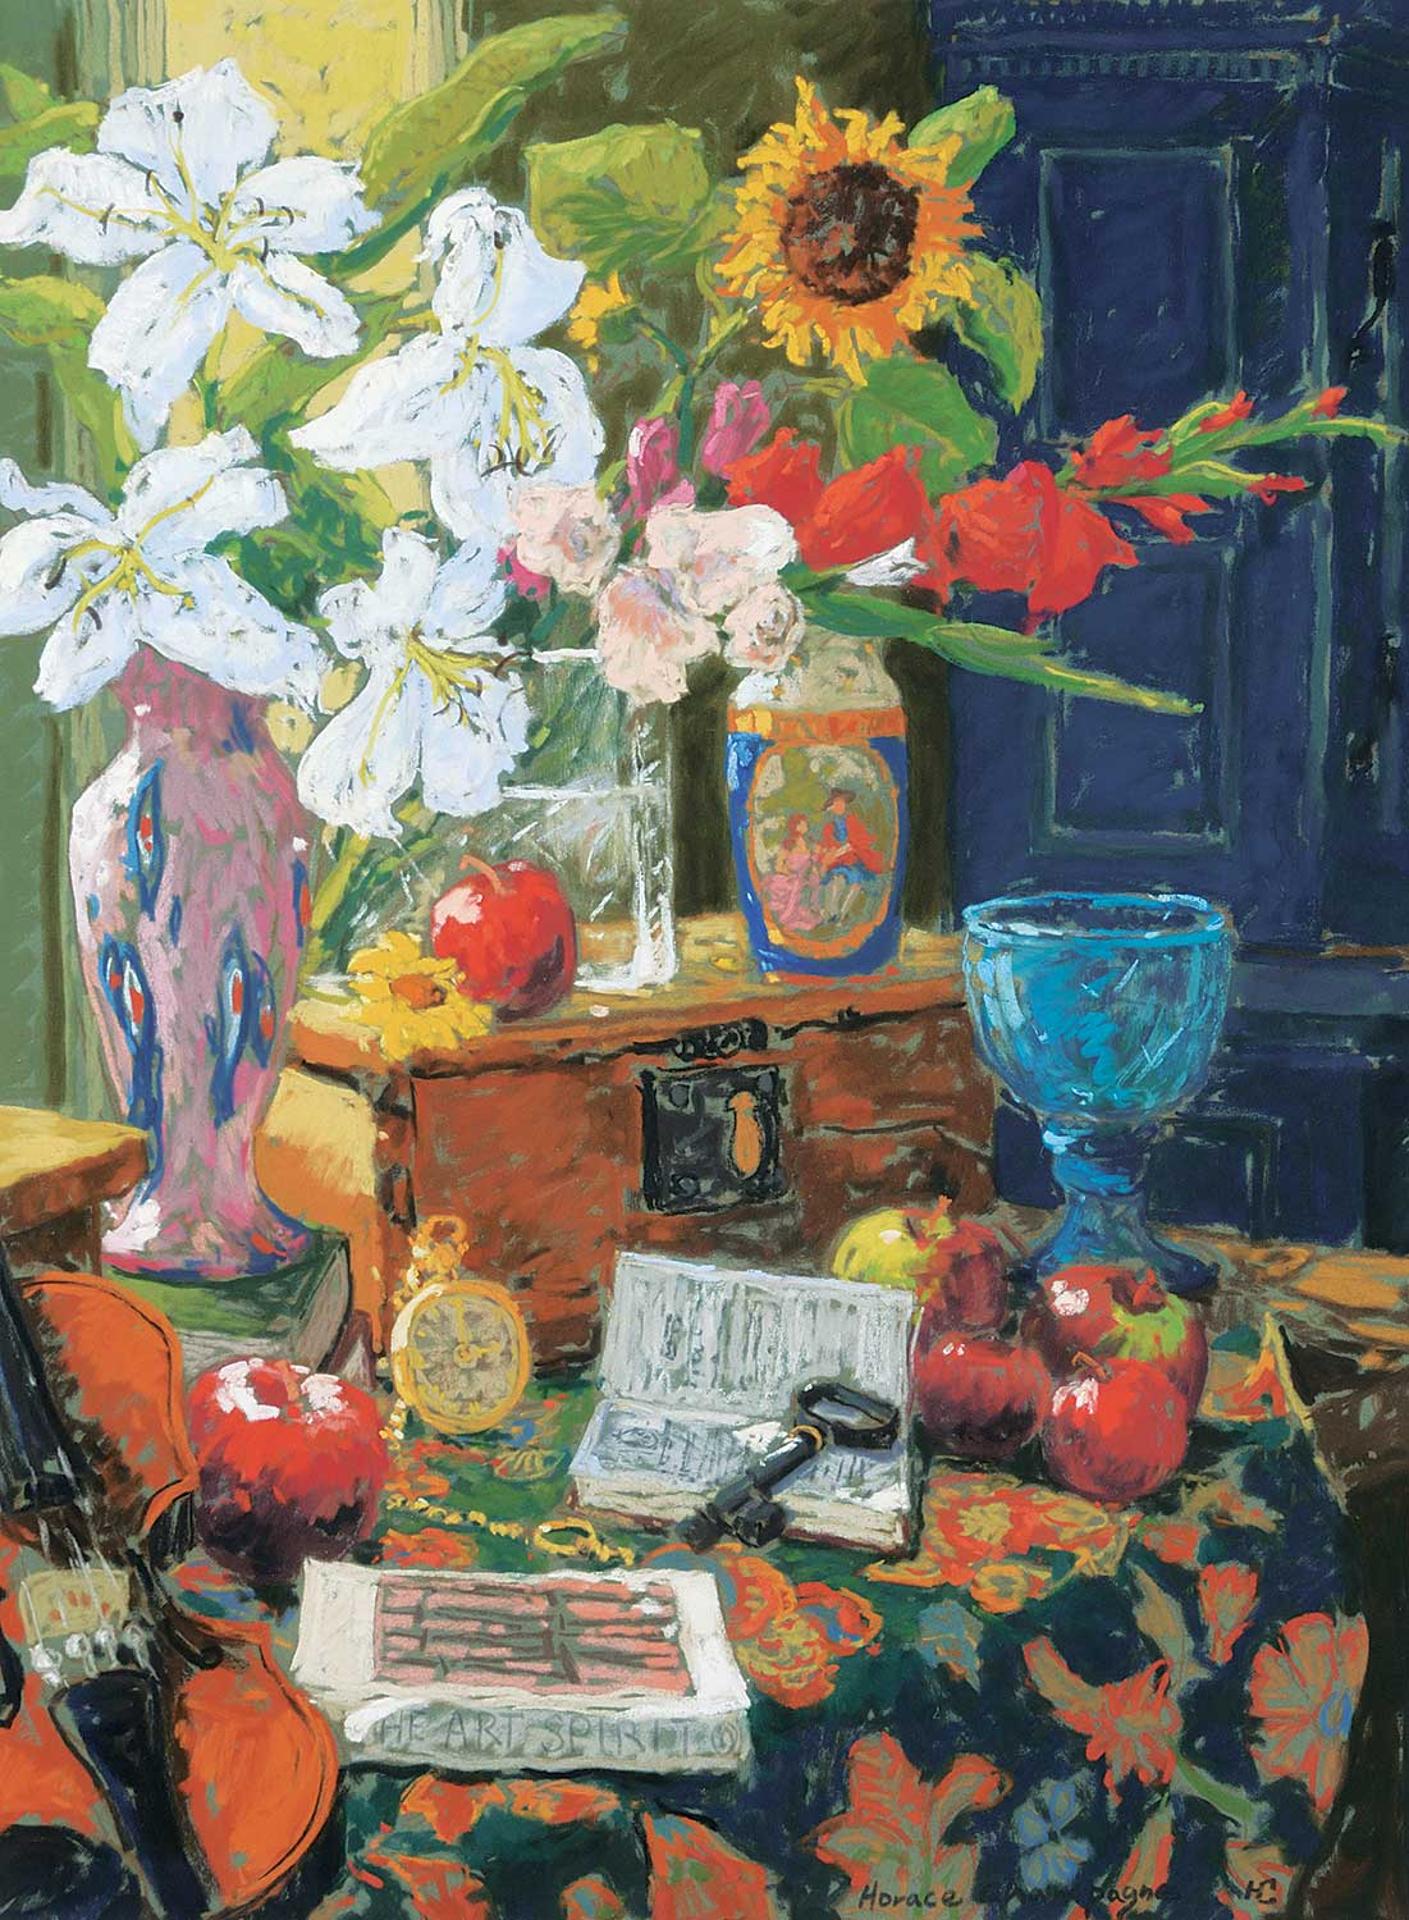 Horace Champagne (1937) - My Inspiration [The Art Spirit by Robert Henry] / A Still Life in My Studio - Ile d'Orleans, Quebec